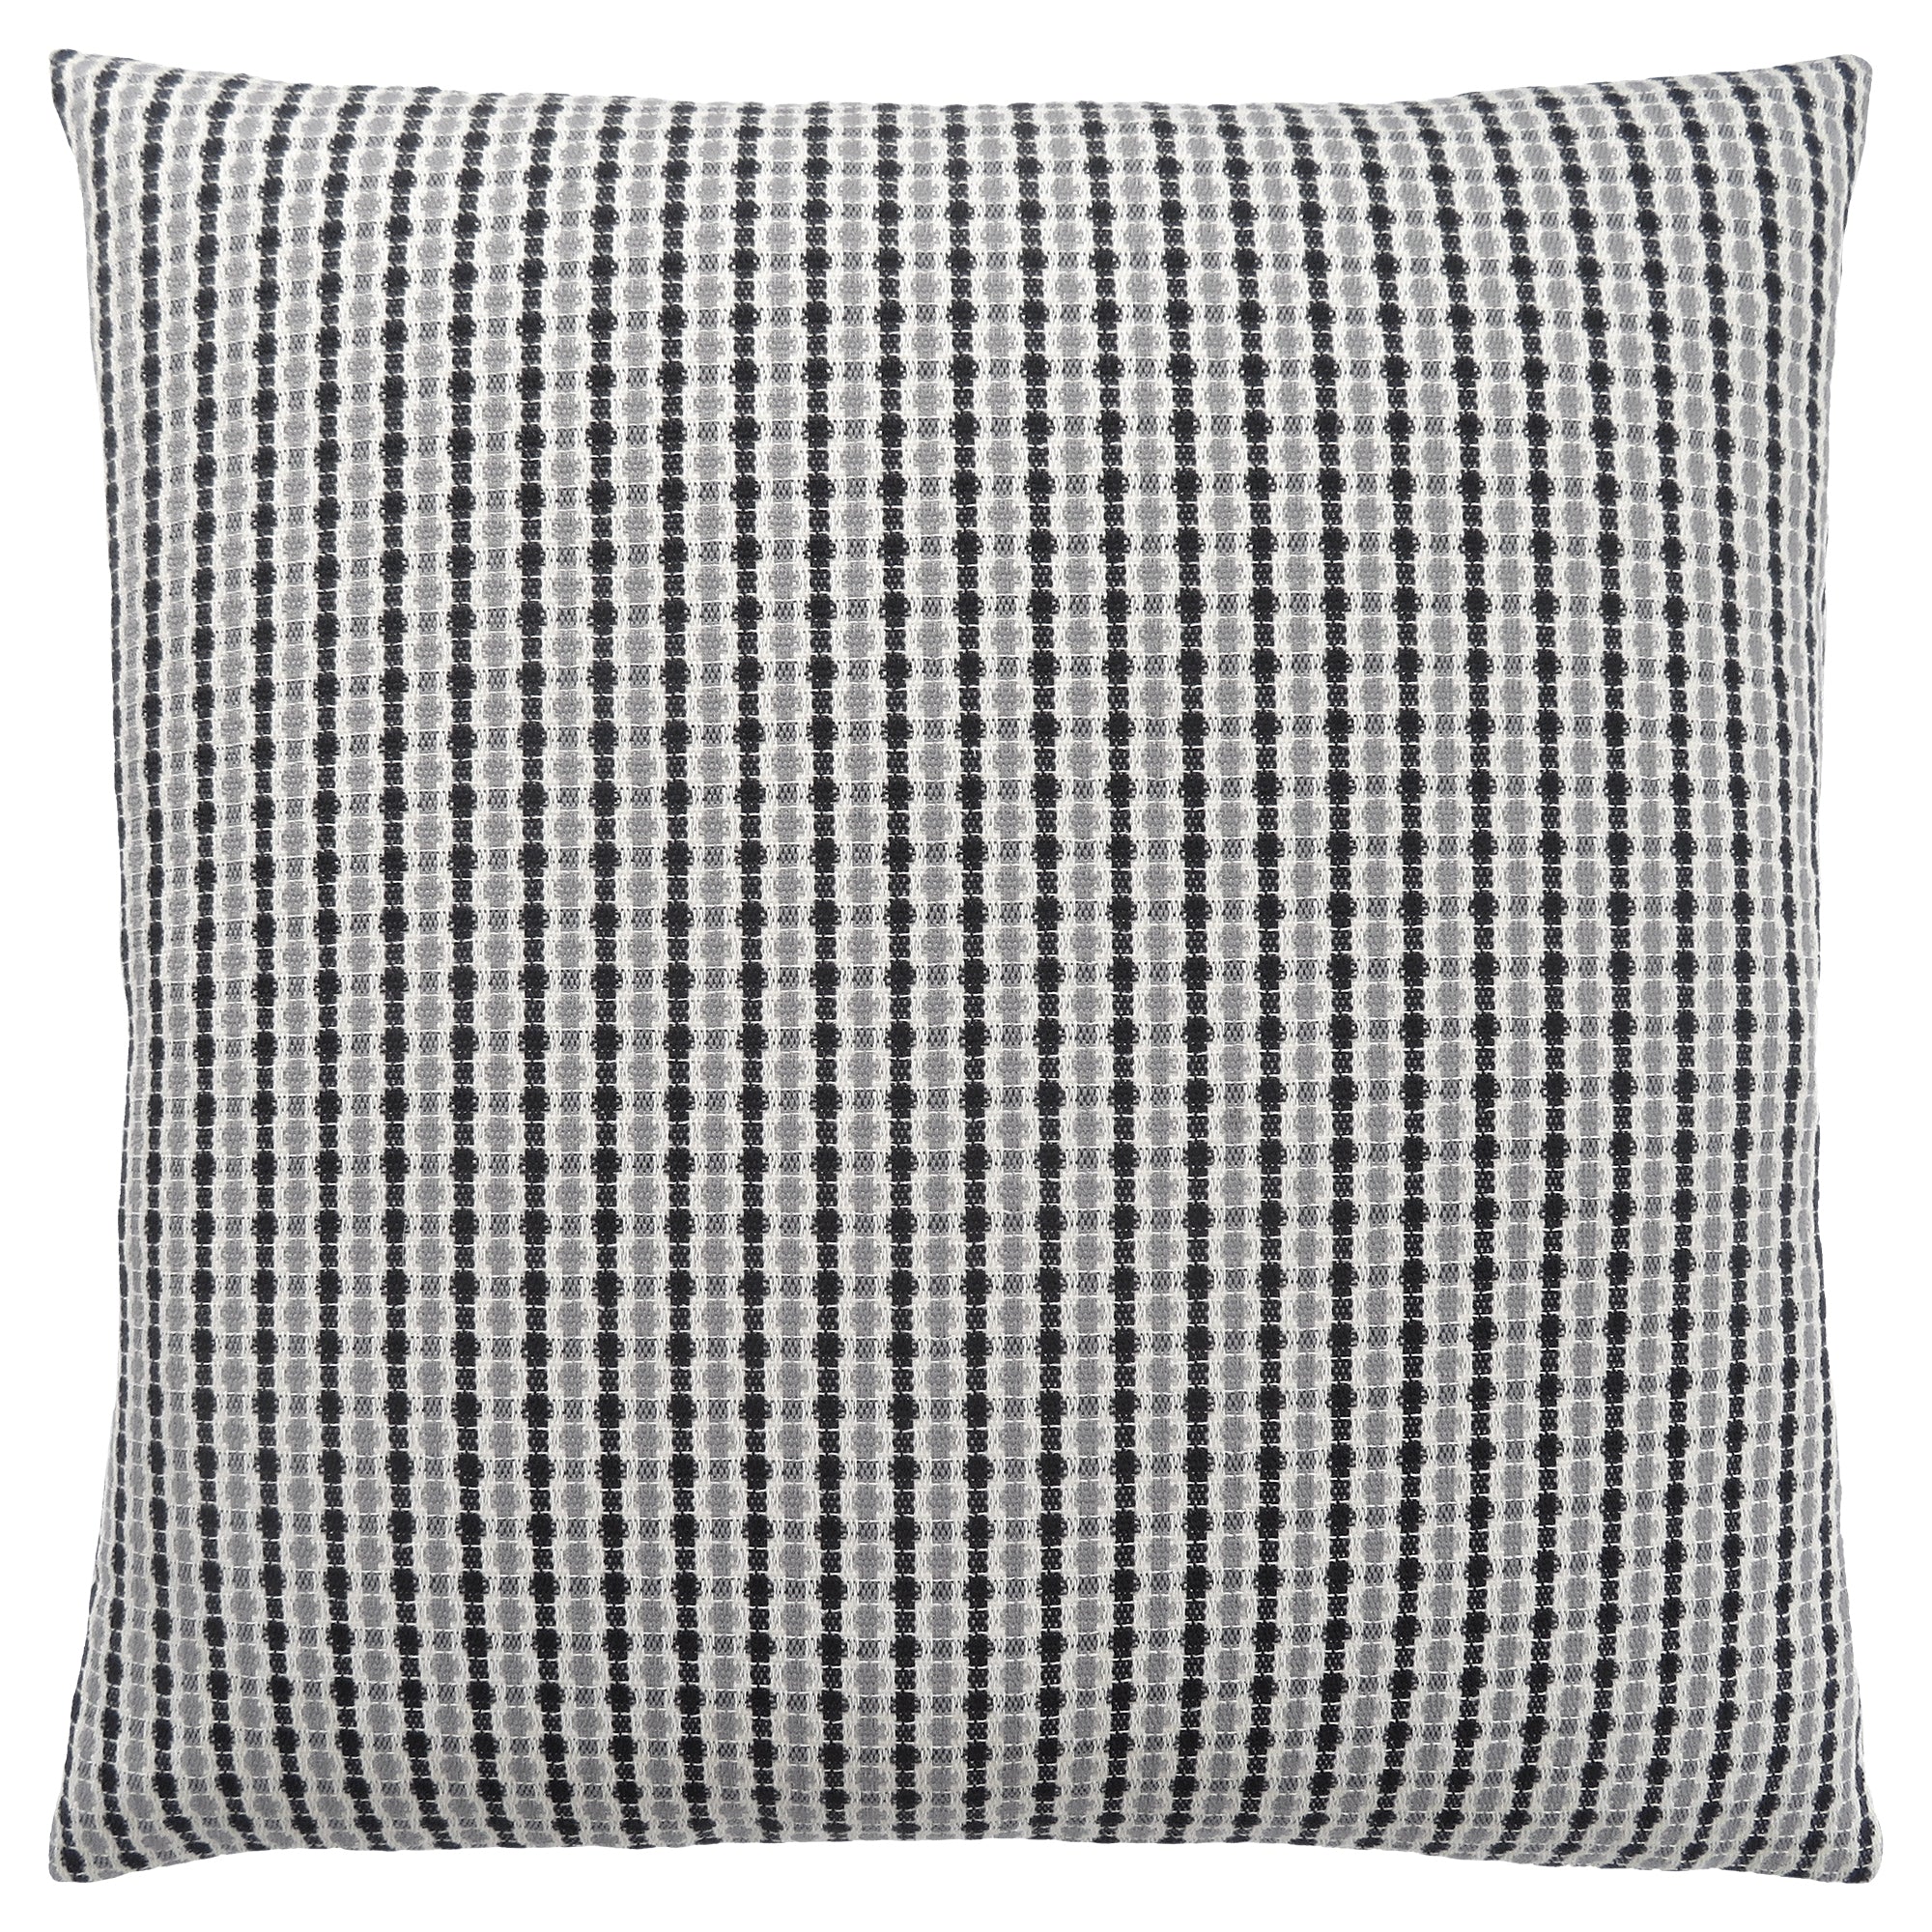 MN-489236    Pillows, 18 X 18 Square, Insert Included, Decorative Throw, Accent, Sofa, Couch, Bed, Soft Polyester Woven Fabric, Hypoallergenic Soft Polyester Insert, Light Grey And Black, Abstract Dot Design, Classic Dot Design, Classic